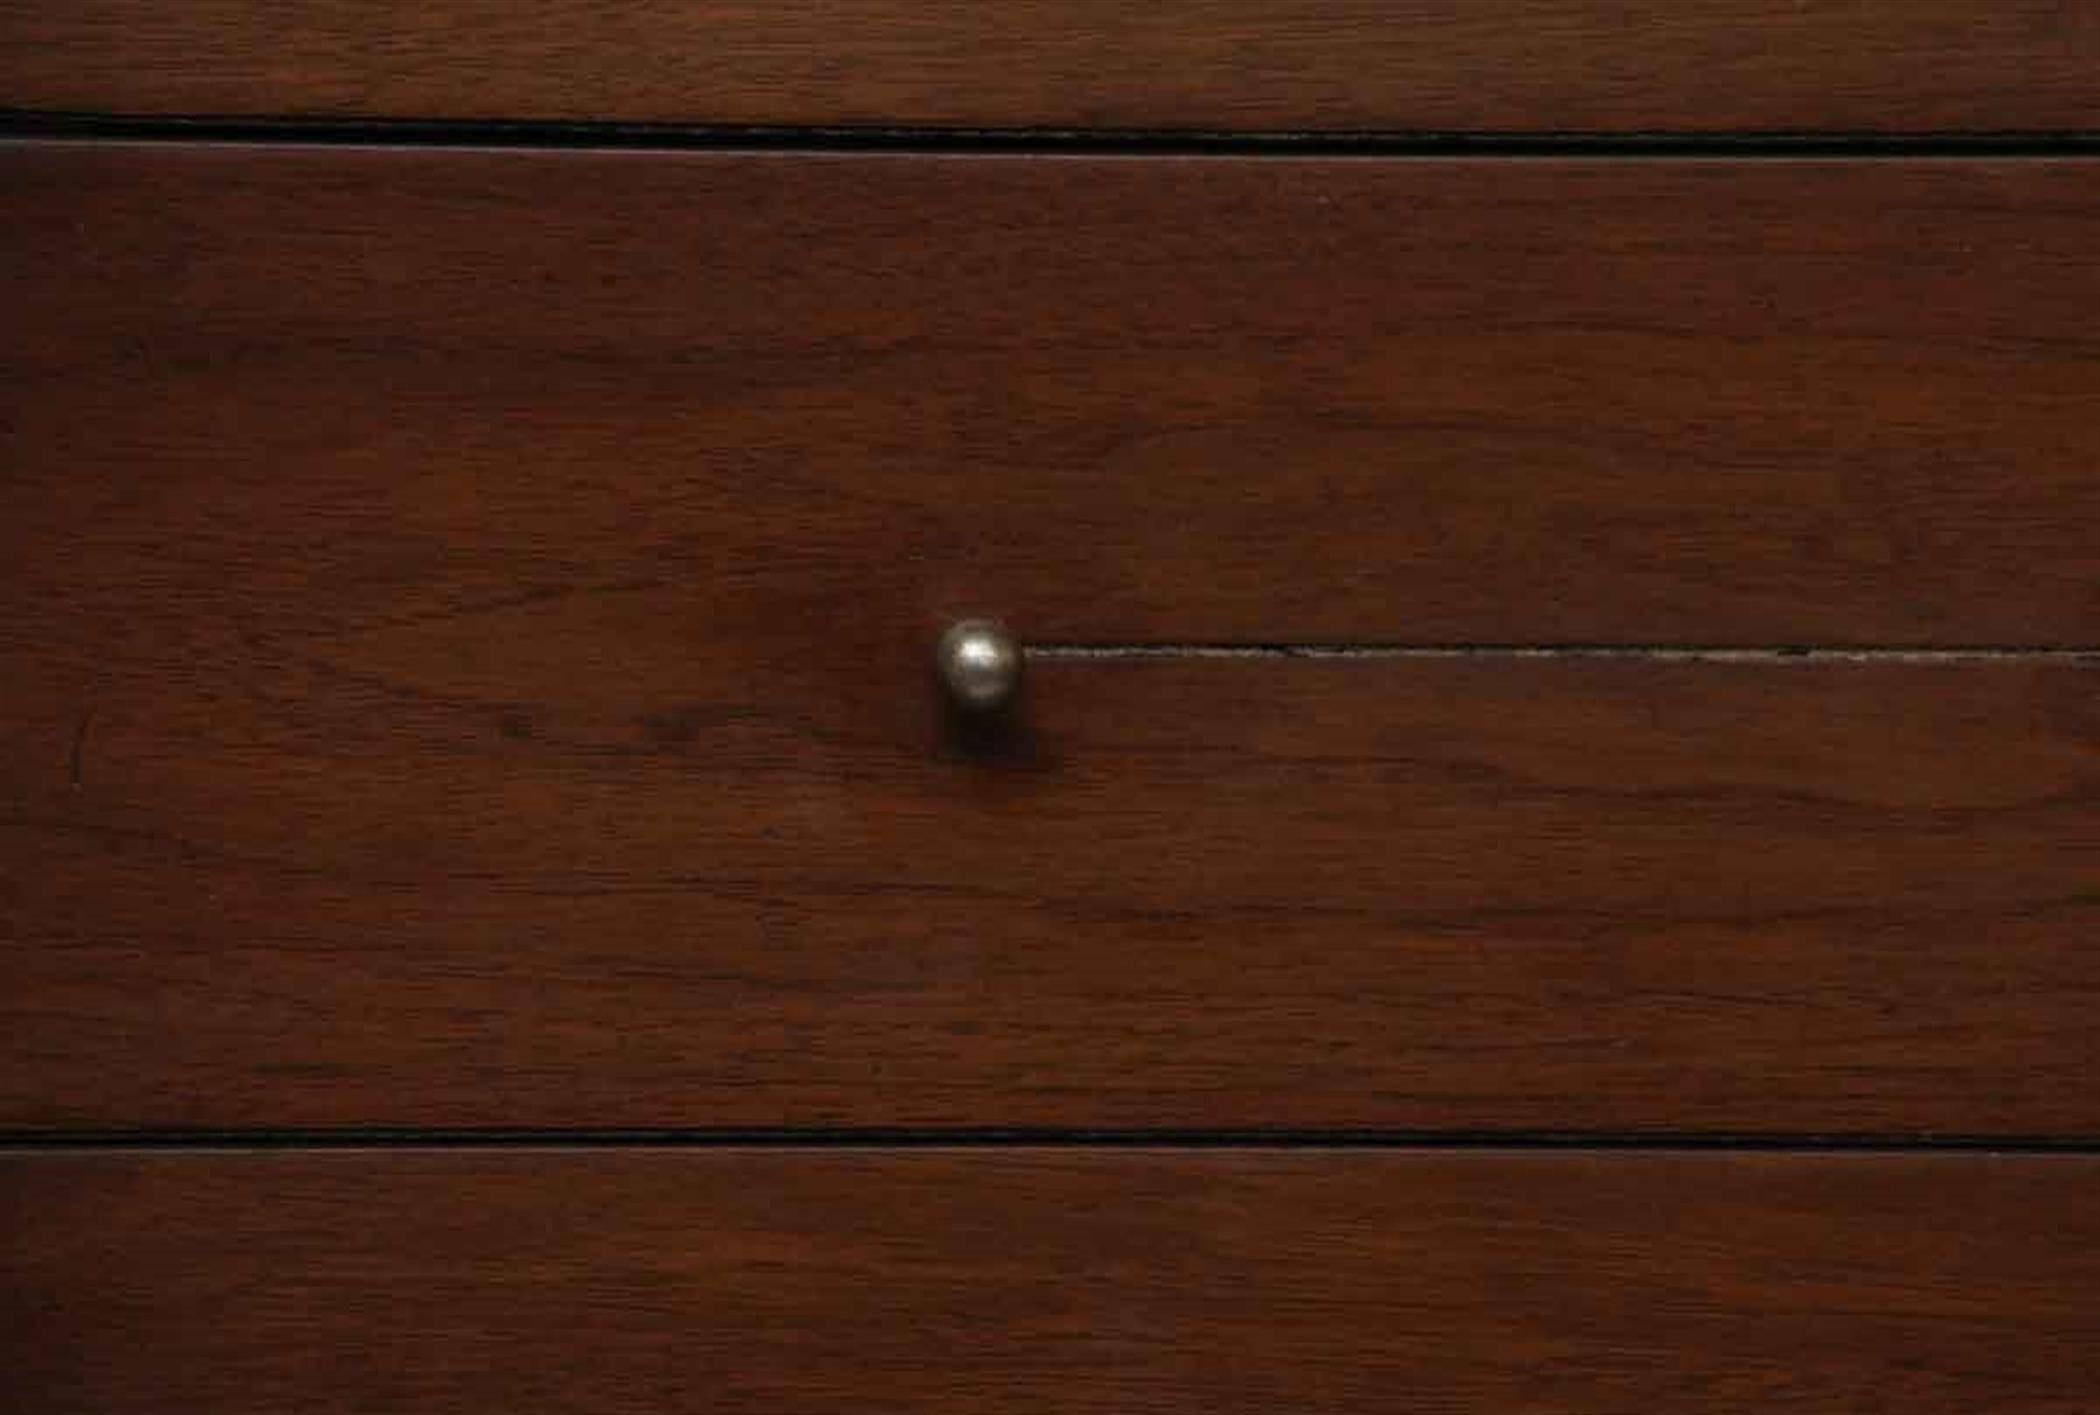 Dark wood tone refinished six-drawer walnut dresser with small nickel drawer pulls. Minor scratches on back top right corner, please see photo. This can be seen at our 302 Bowery location in Manhattan.